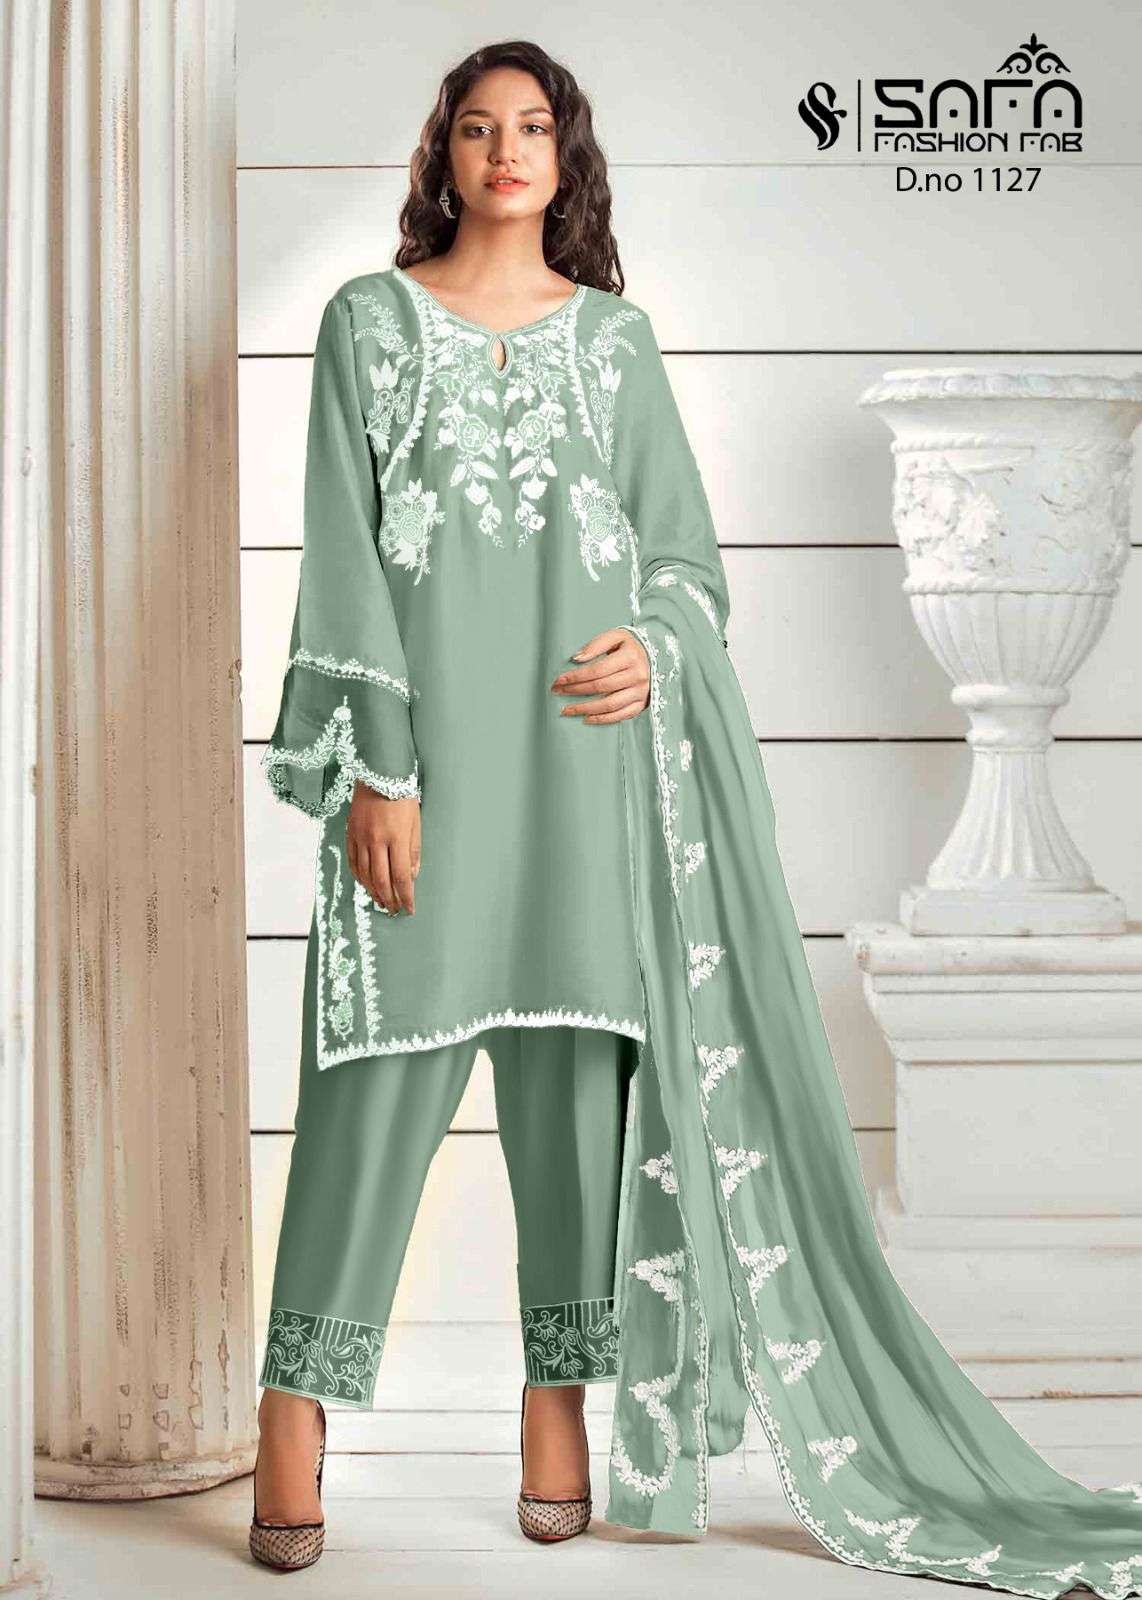 Punjabi Trouser Suit Design for Every Occasion